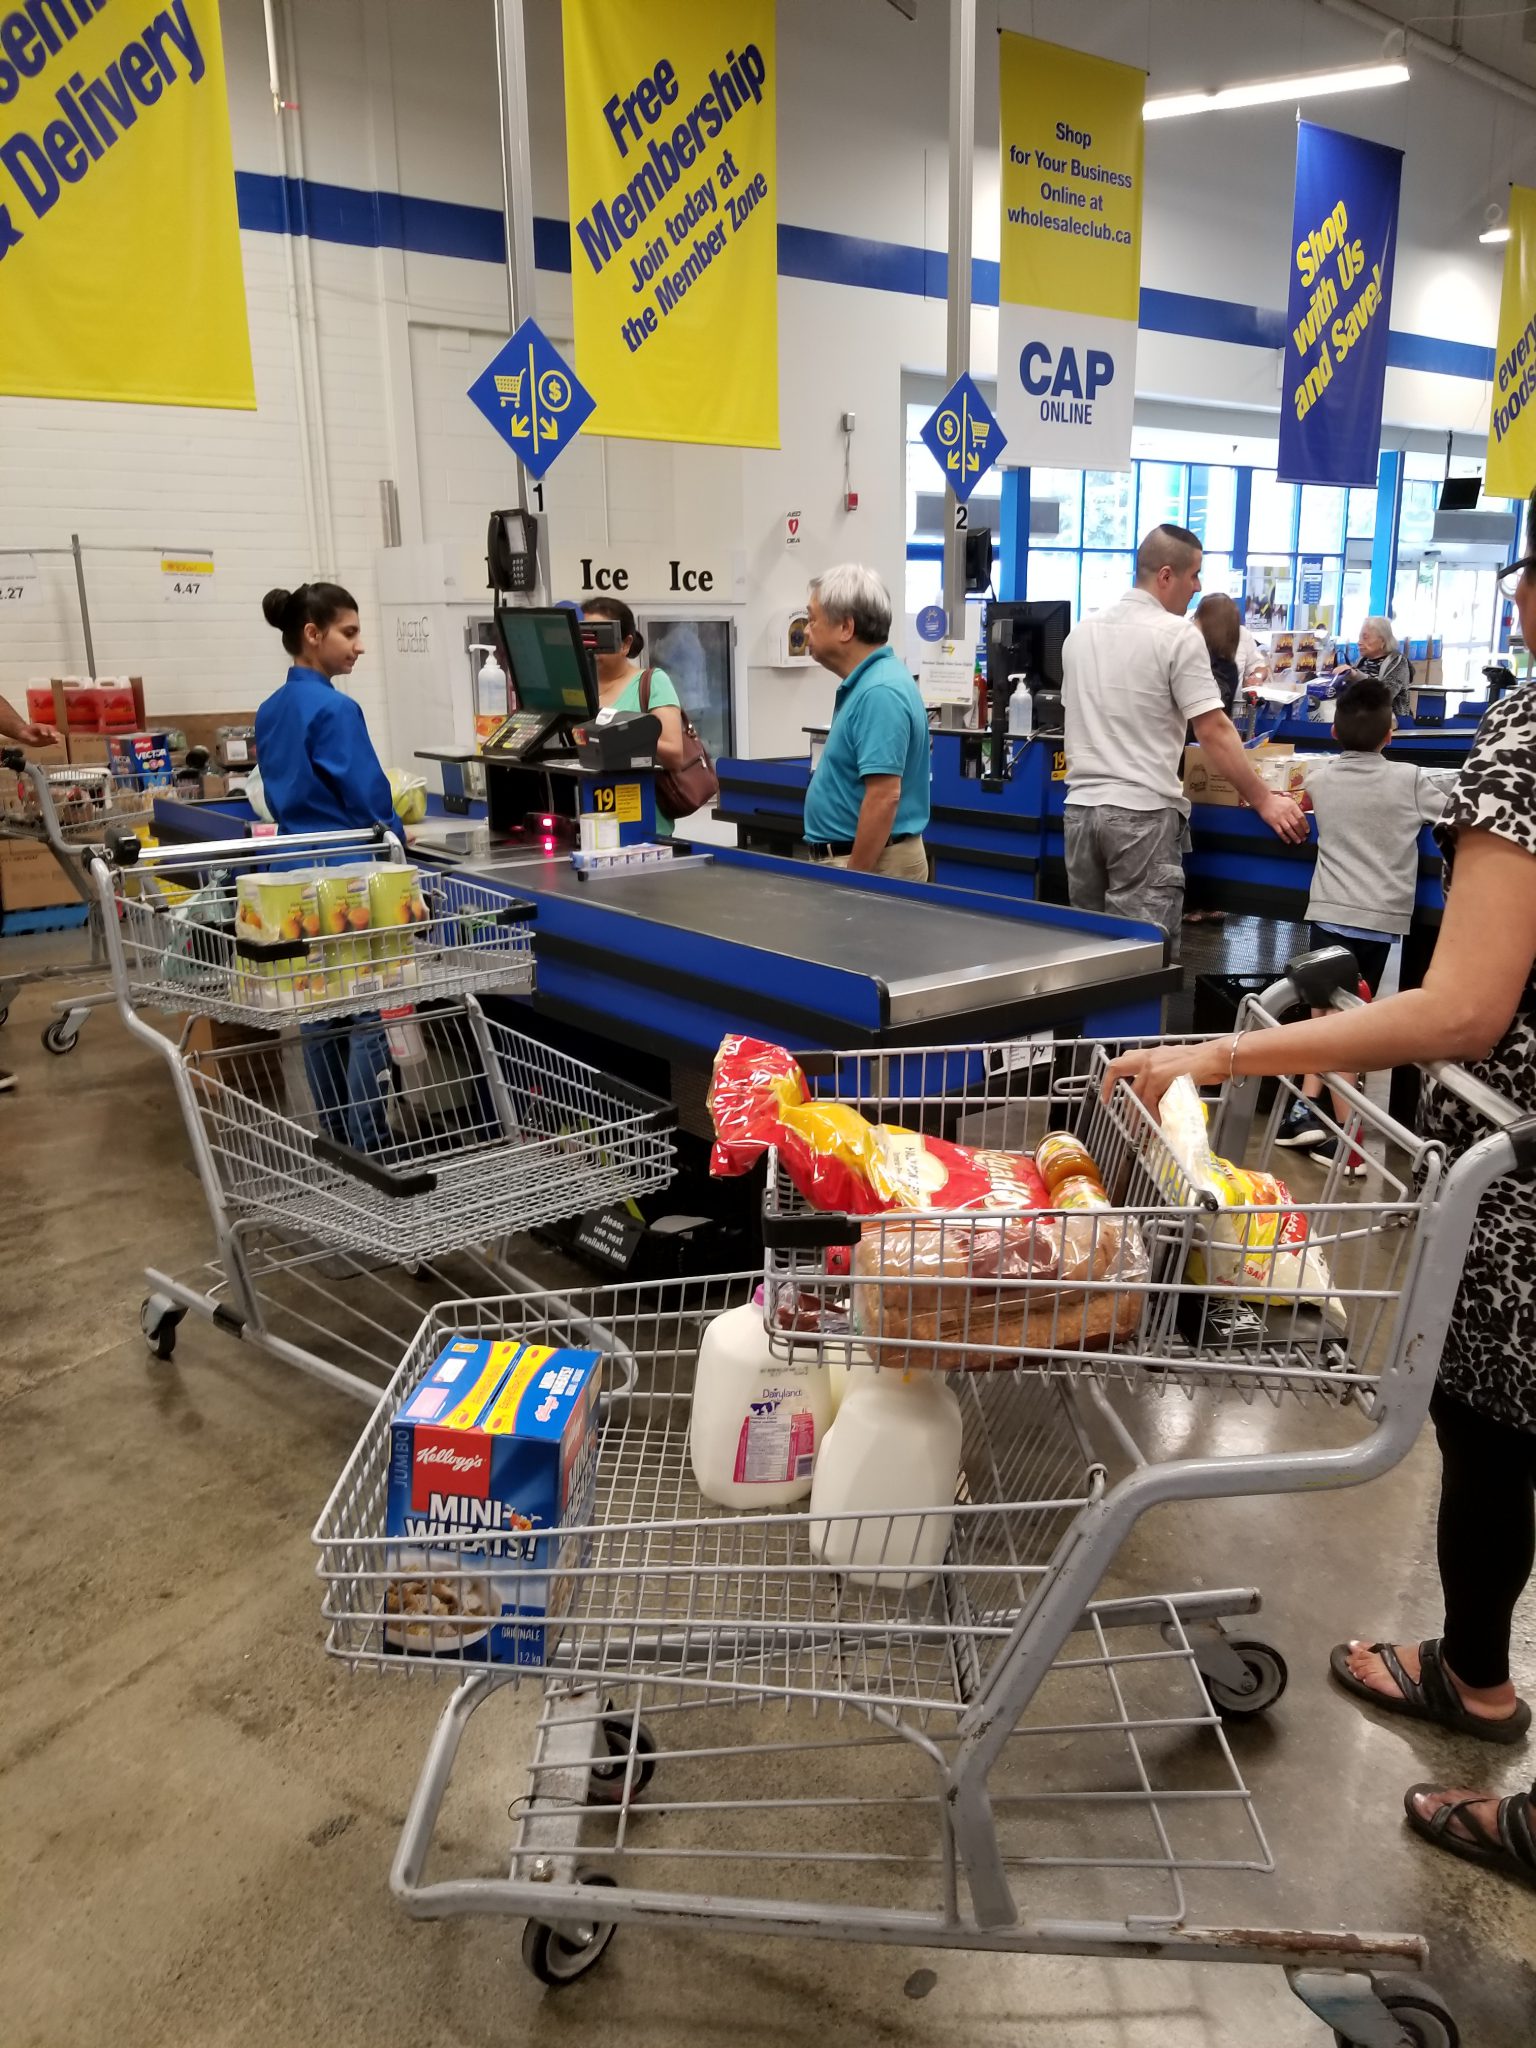 family members helping in buying products for the business